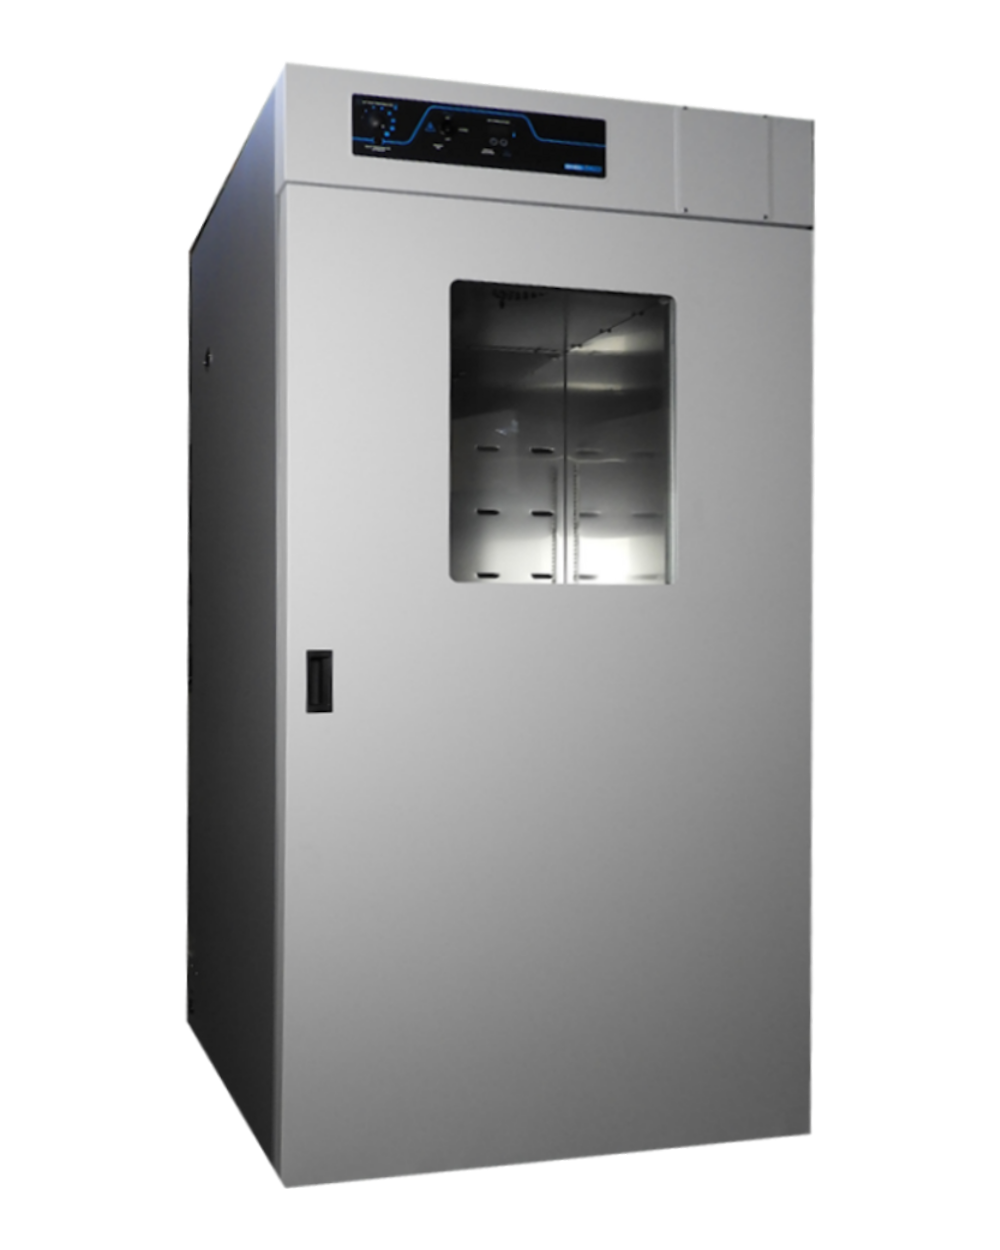 So-Low To 70ºC, 40cu. ft. Large Capacity, 115v